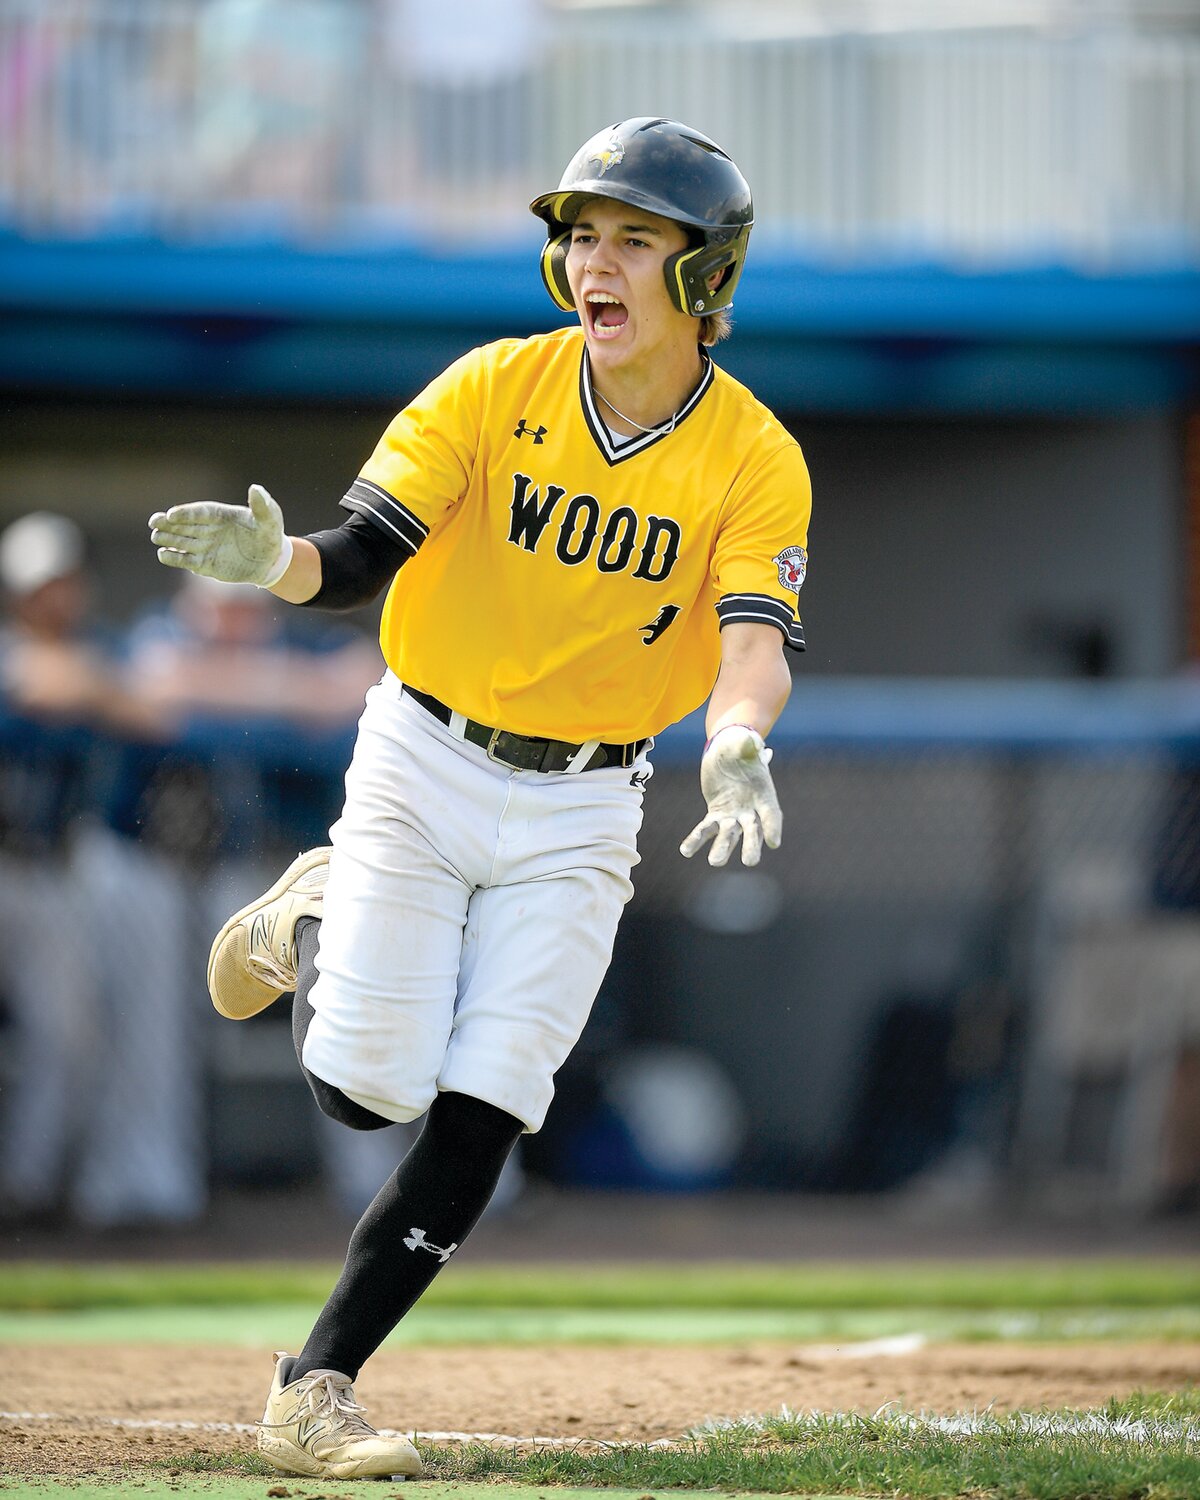 Archbishop Wood’s JP DiGuiseppe shouts to the dugout on his way to first base.